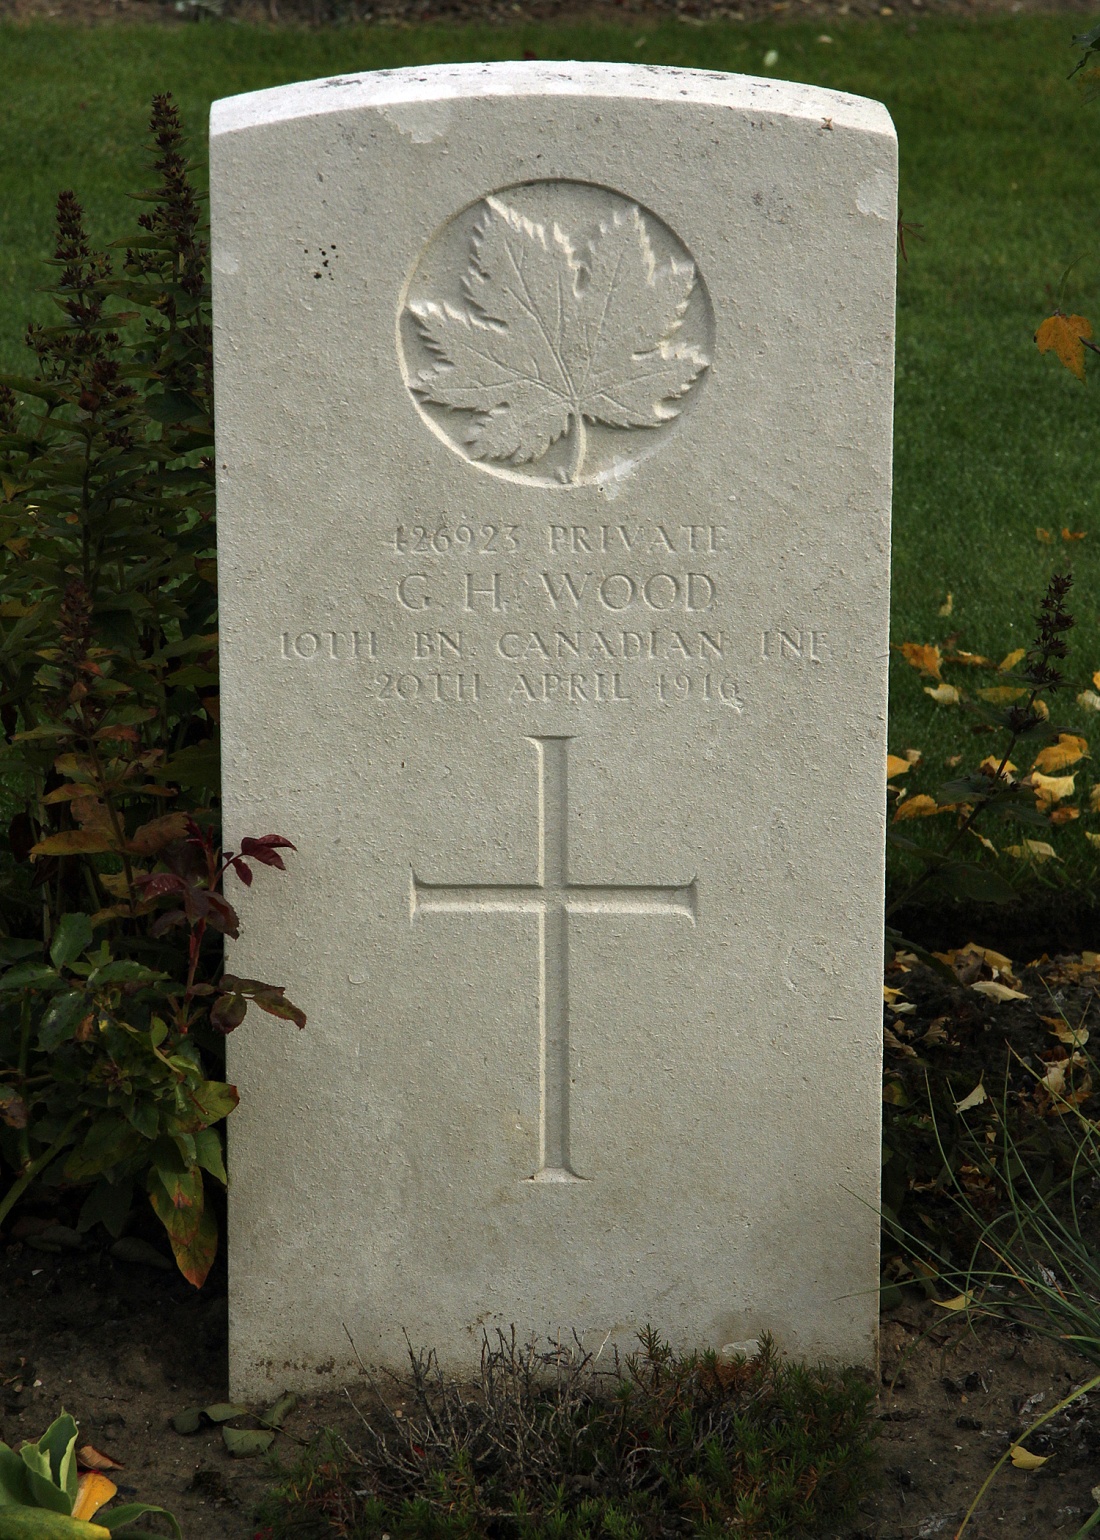 Headstone of Private George Wood. Image supplied by Philip Wheeler.